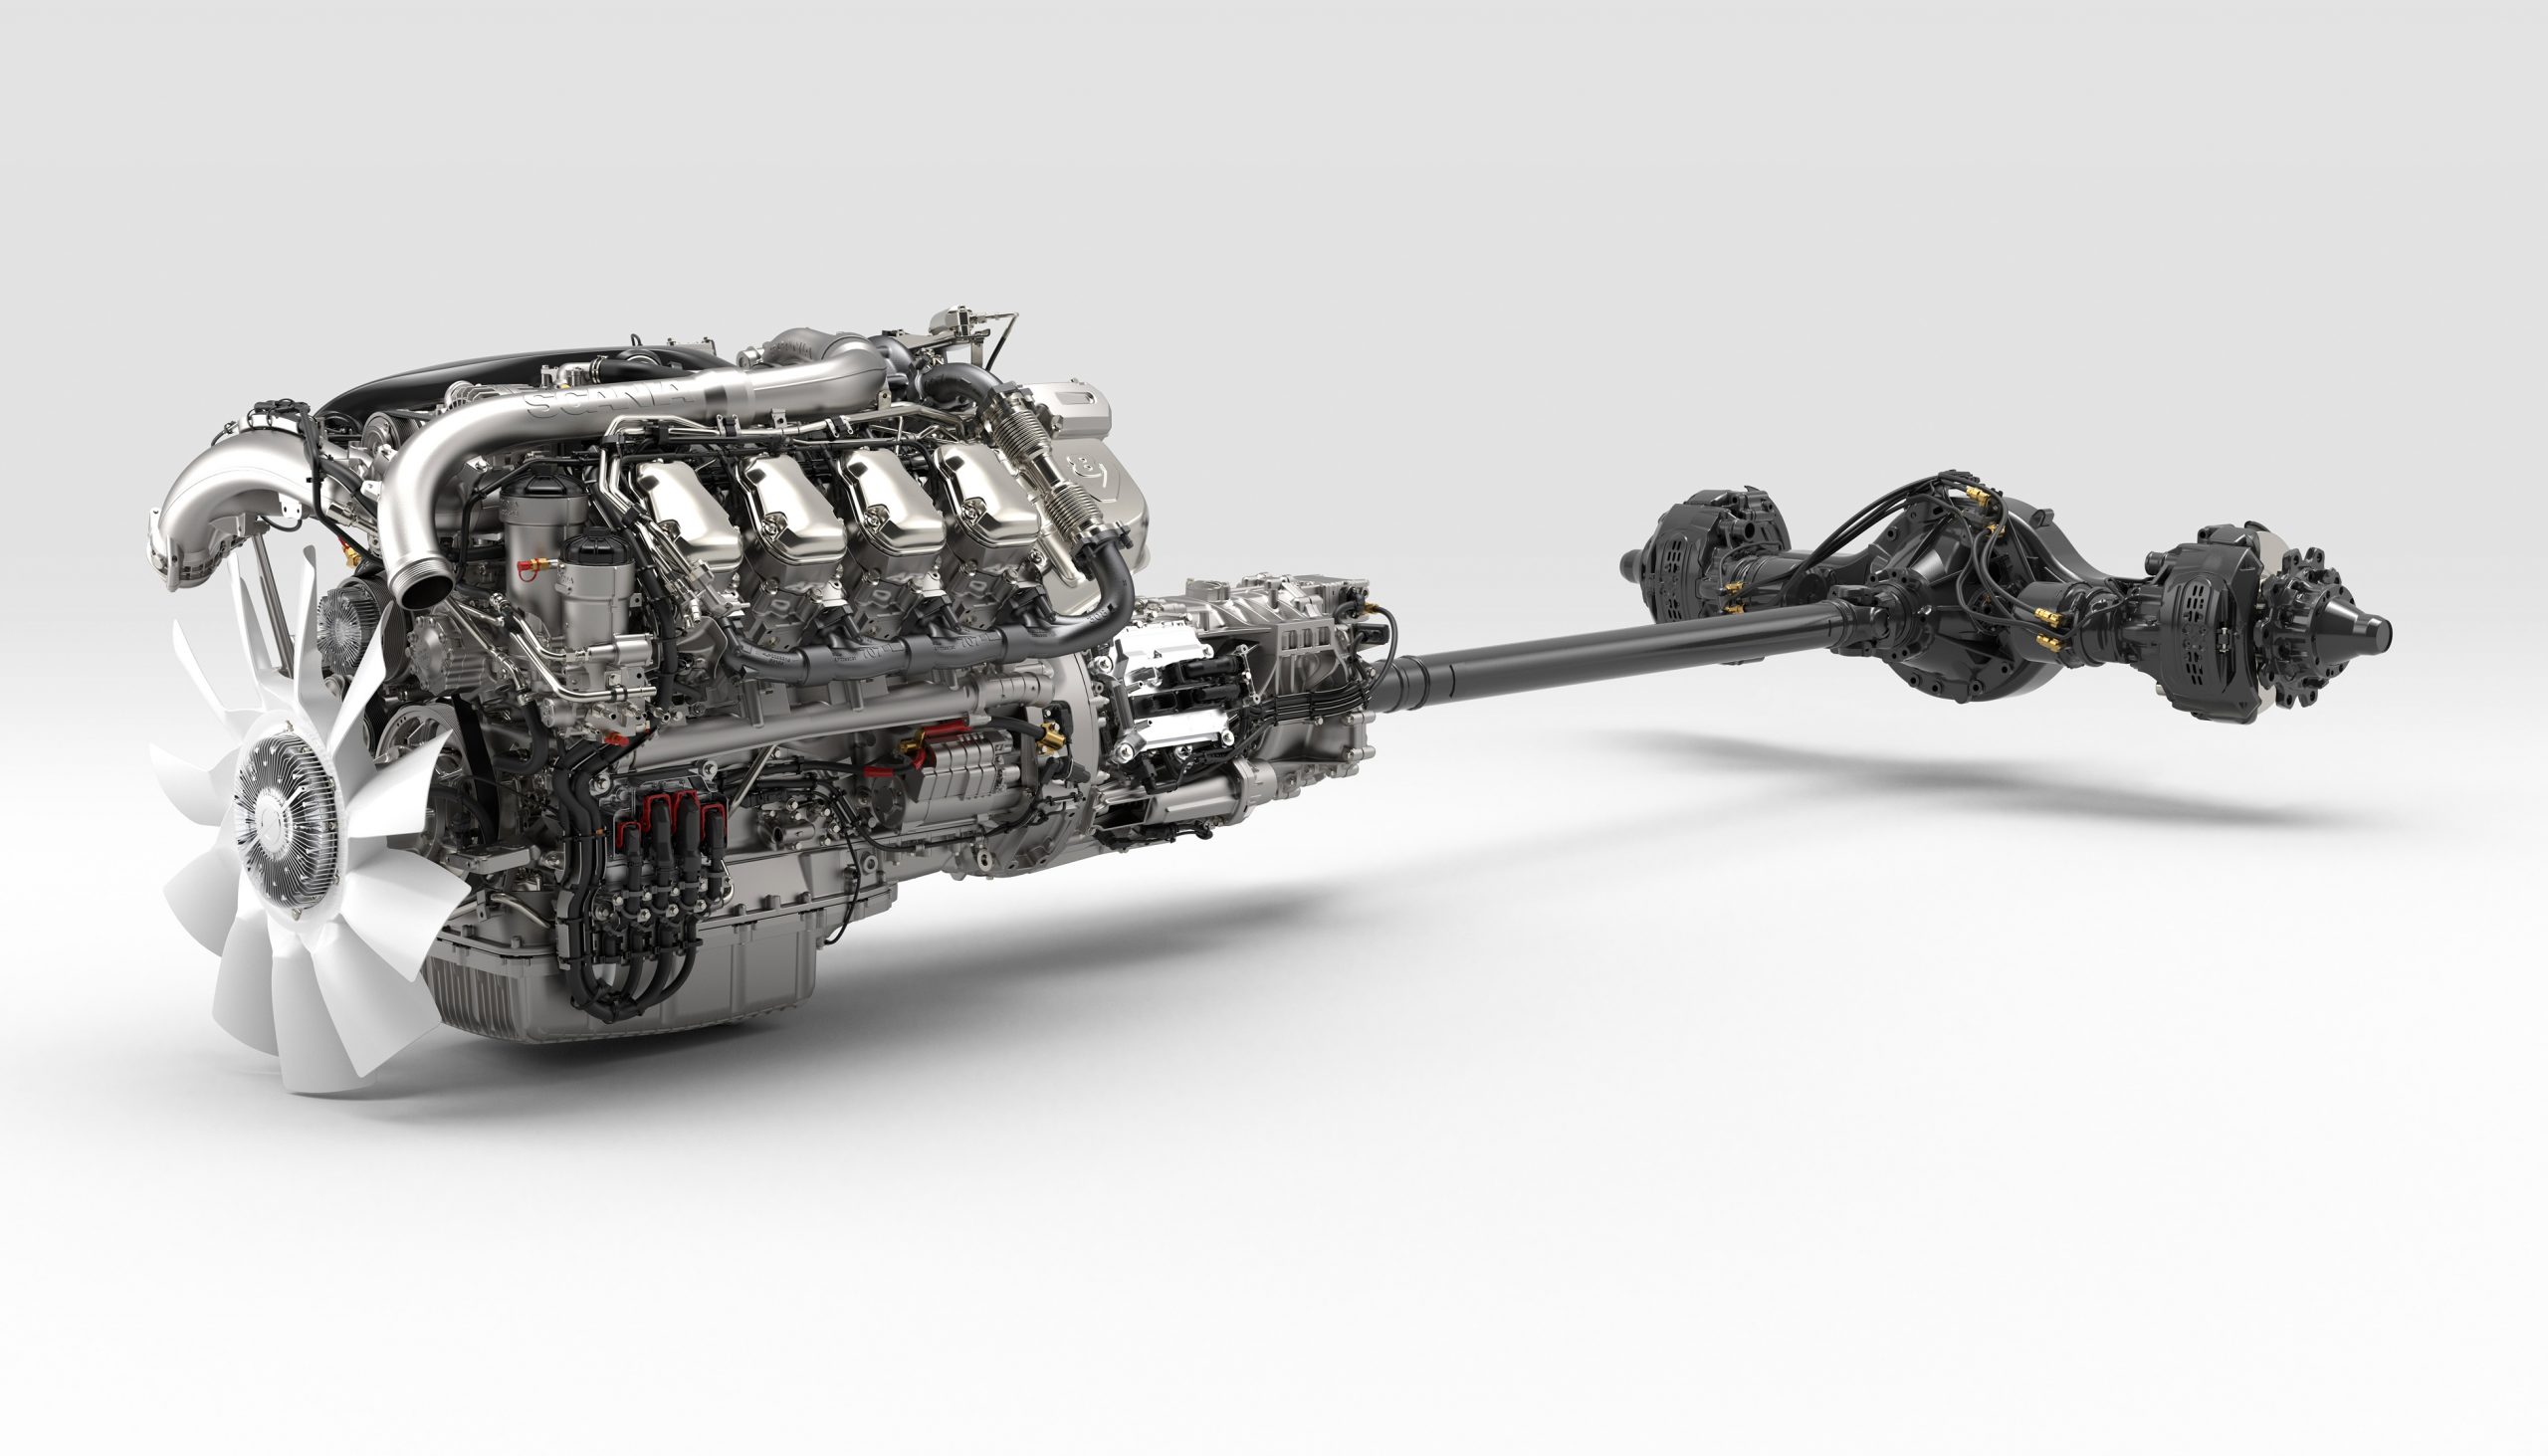 SCANIA PUSHES THE POWER ENVELOP WITH REVISED V8 ENGINE LINE-UP